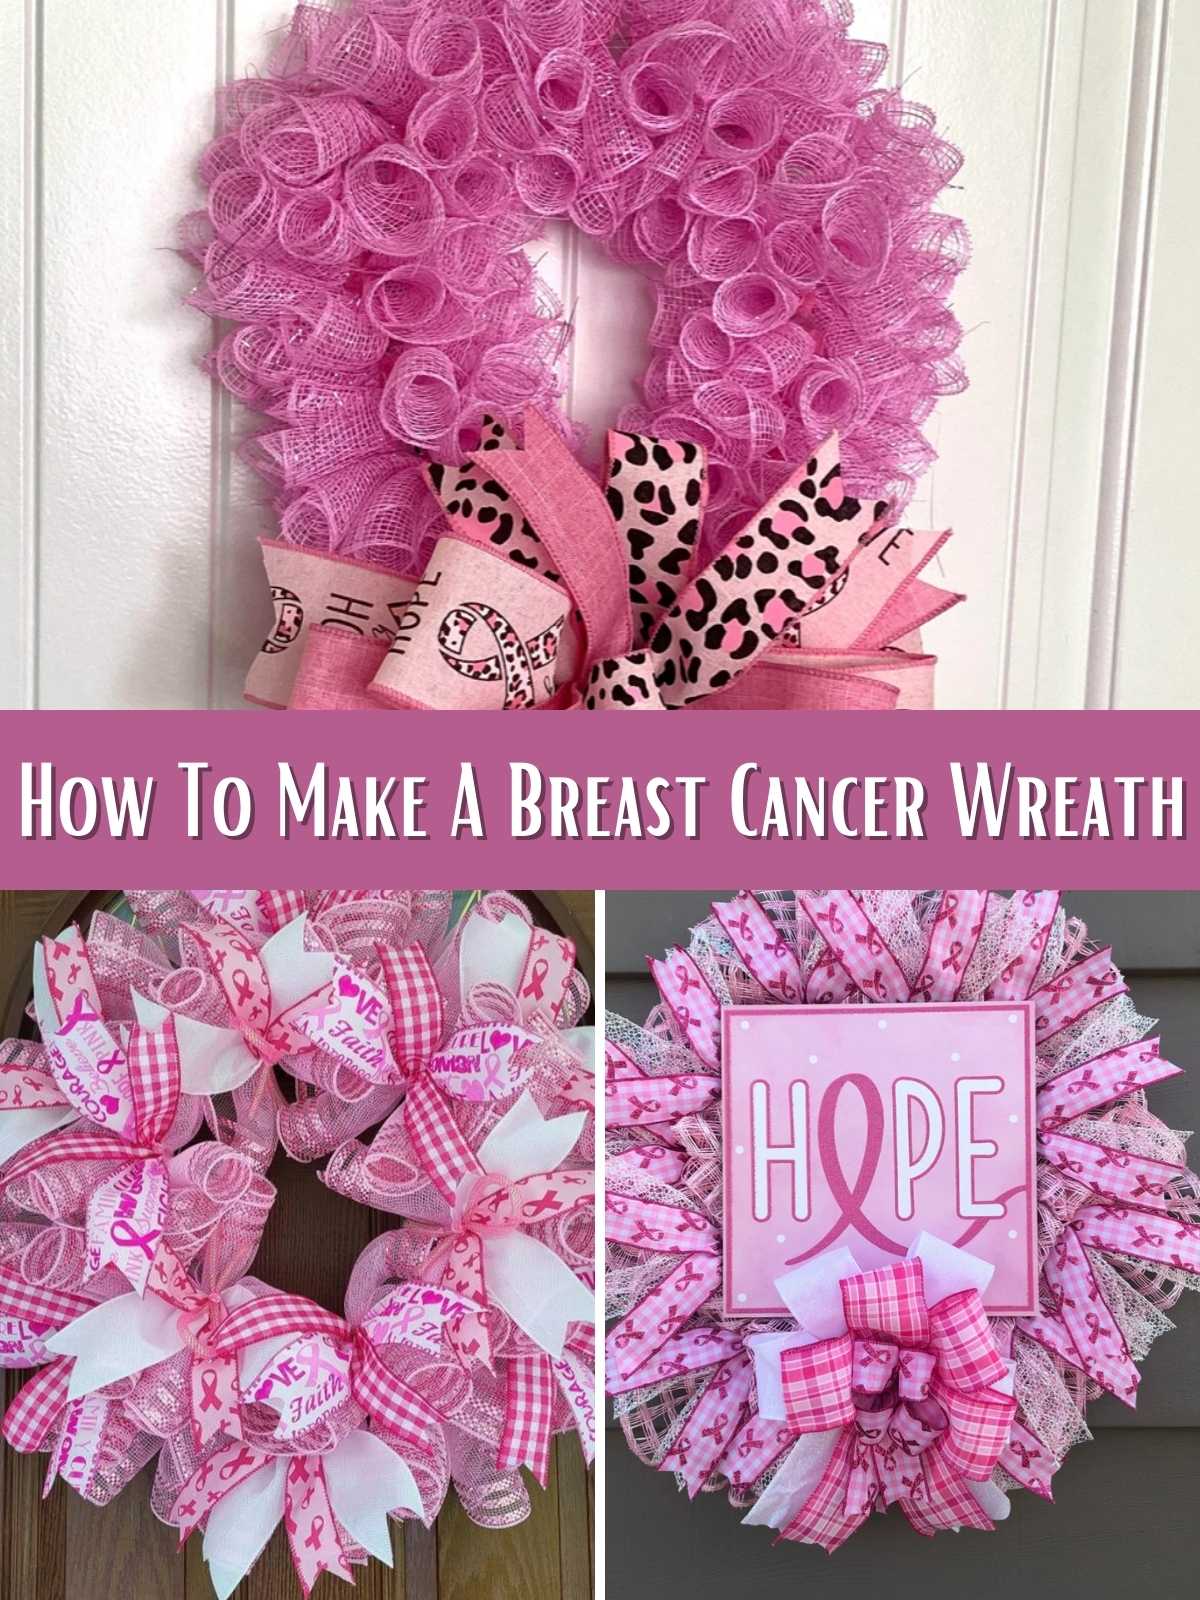 How to make a cancer support wreath idea. Bright pink ideas.